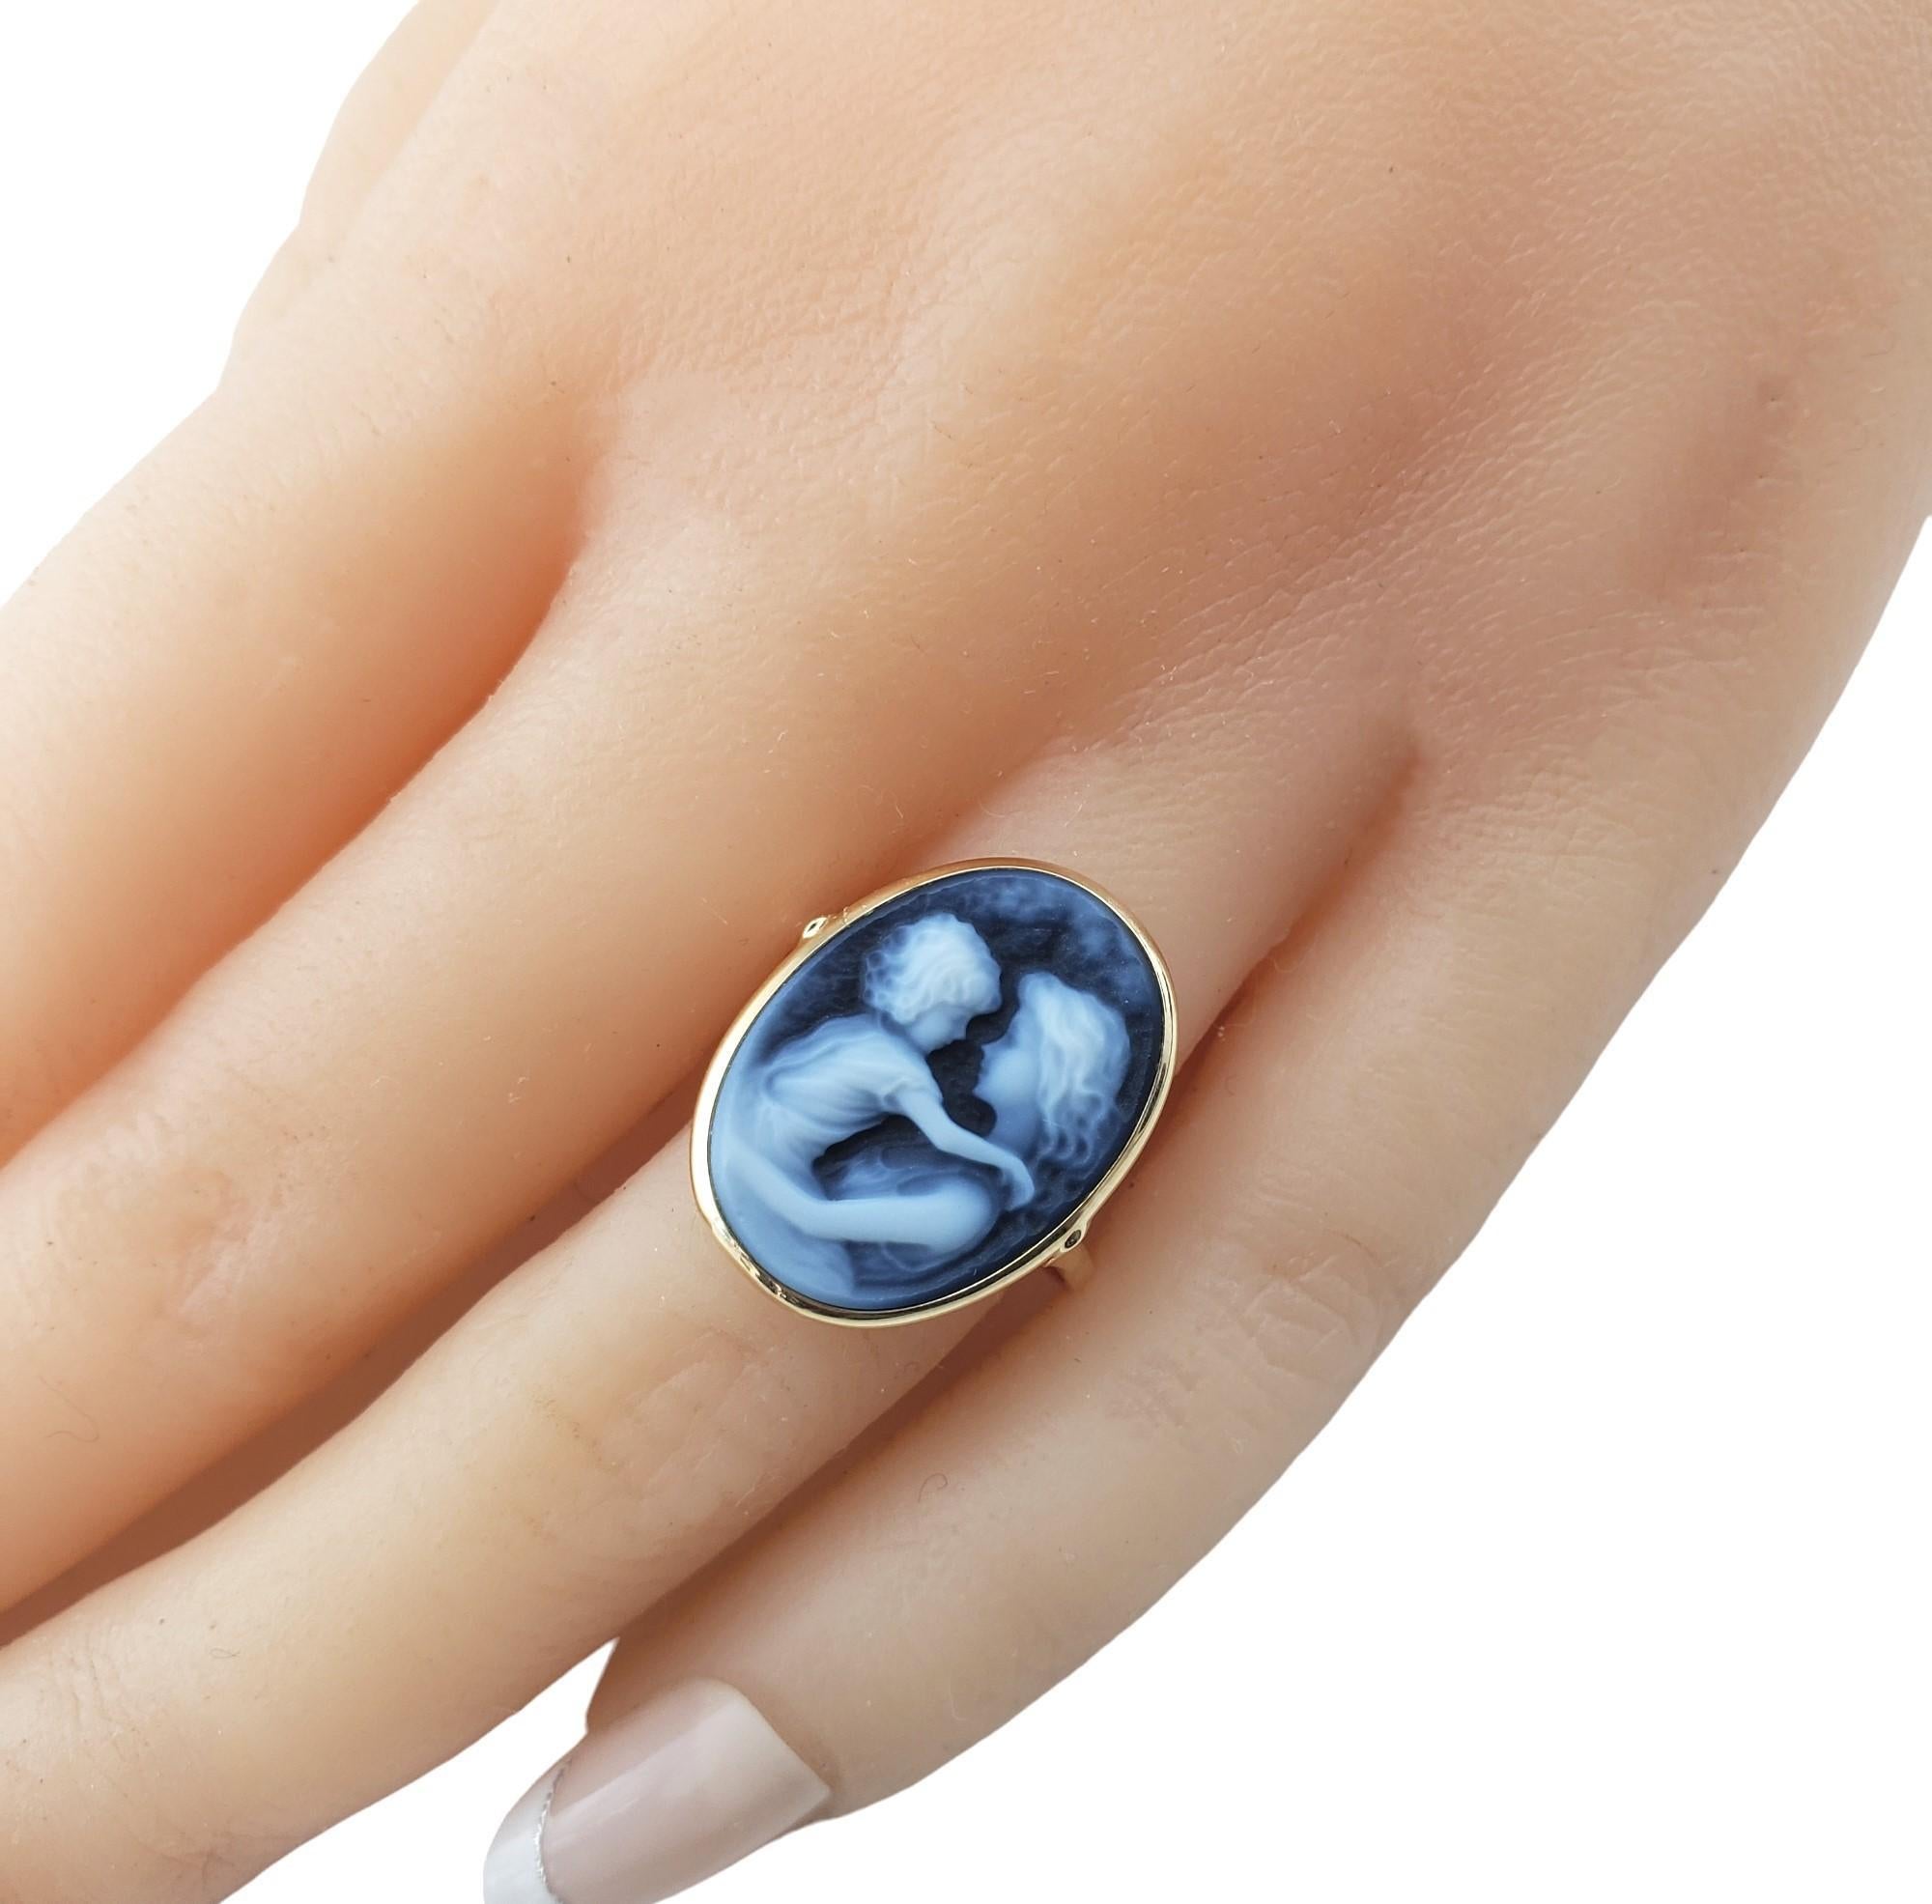  14 Karat Yellow Gold Blue Agate Mother Child Cameo Ring Size 7 #15525 1